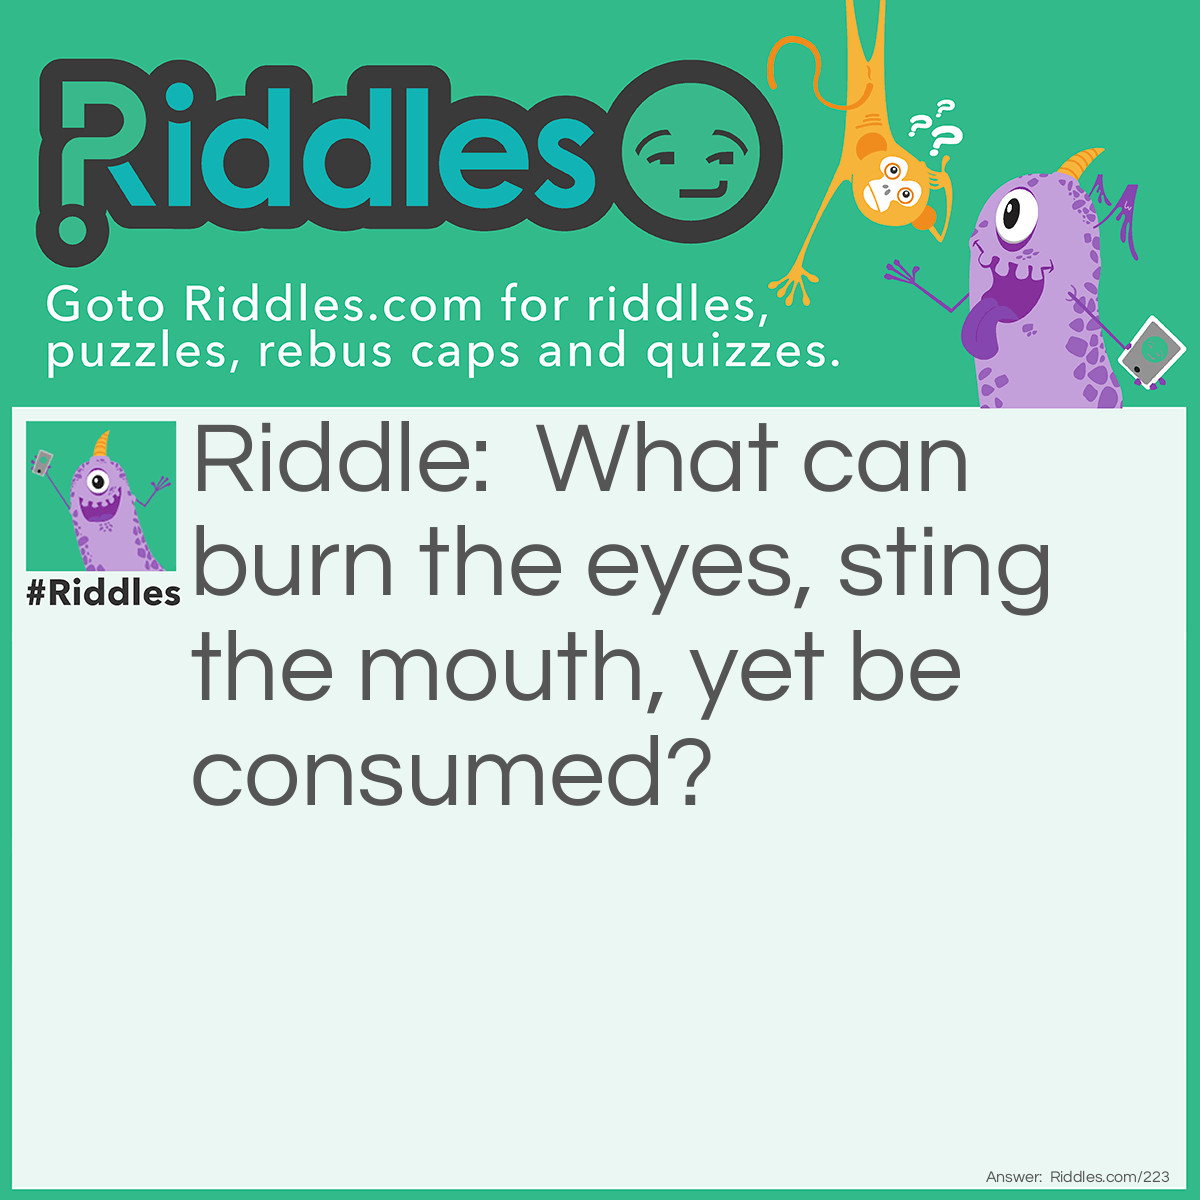 Riddle: What can burn the eyes, sting the mouth, yet be consumed? Answer: Salt.